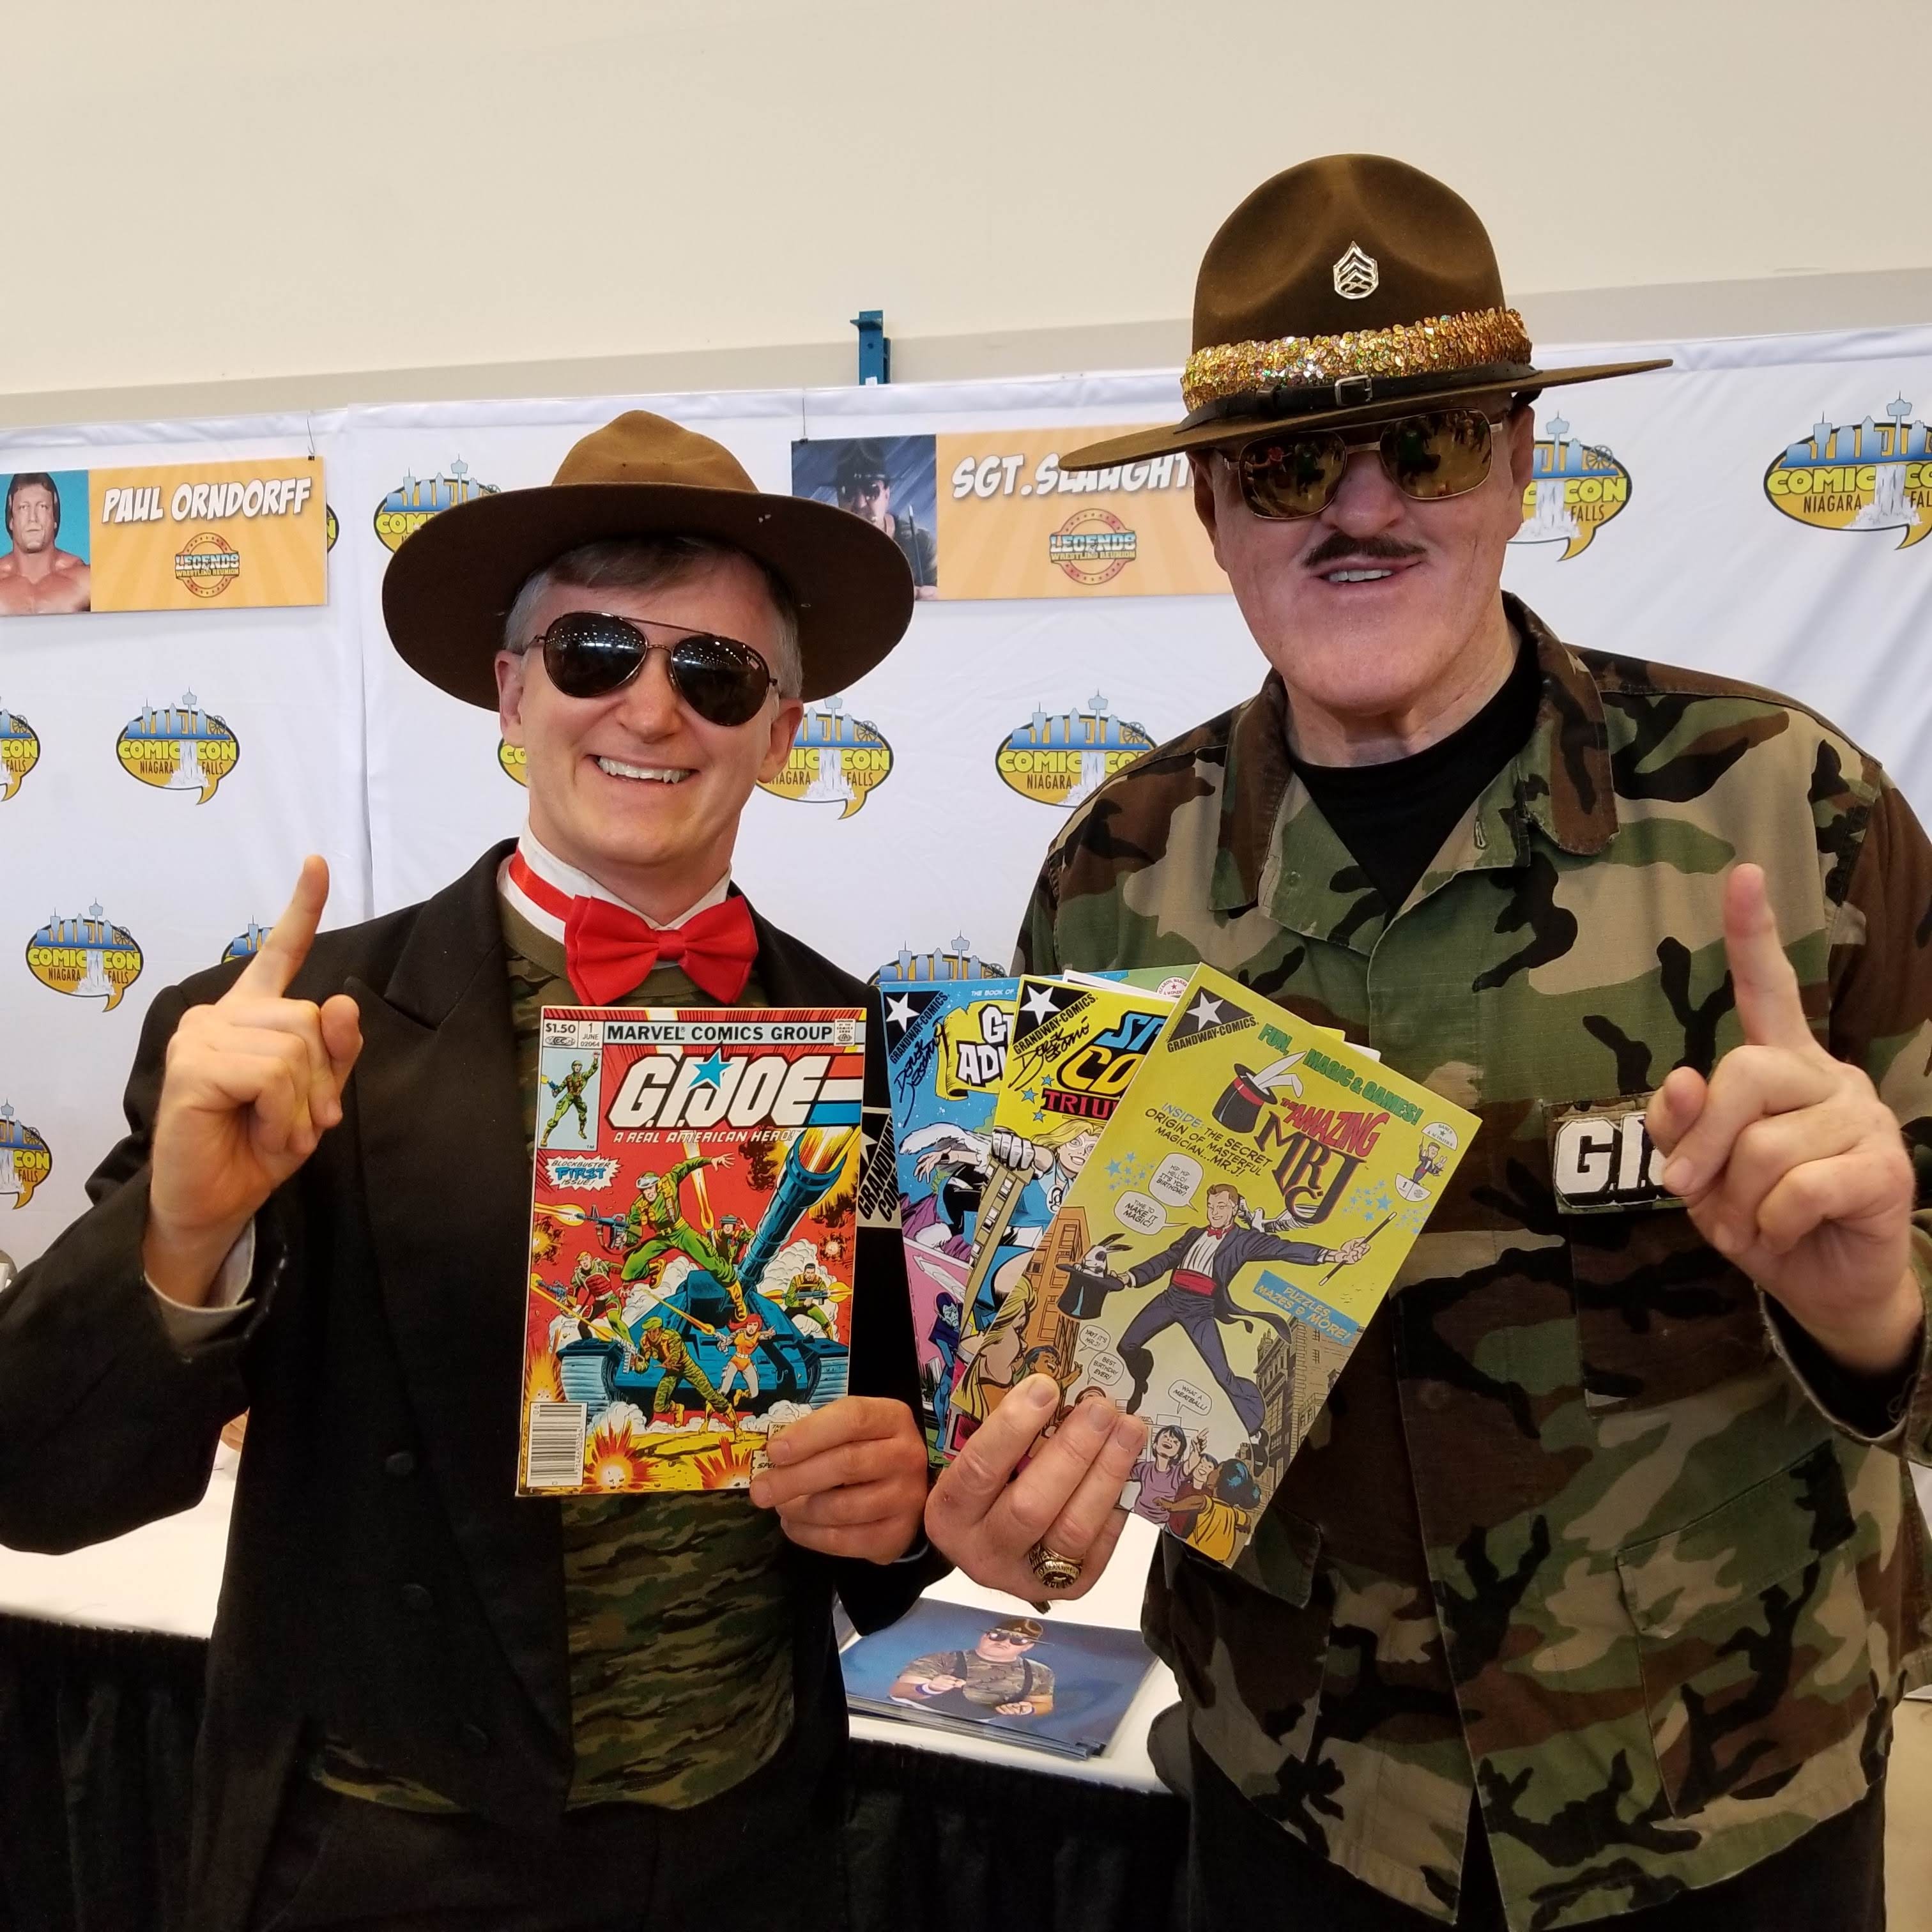 Sgt. Slaughter (We react to each others' comics!)